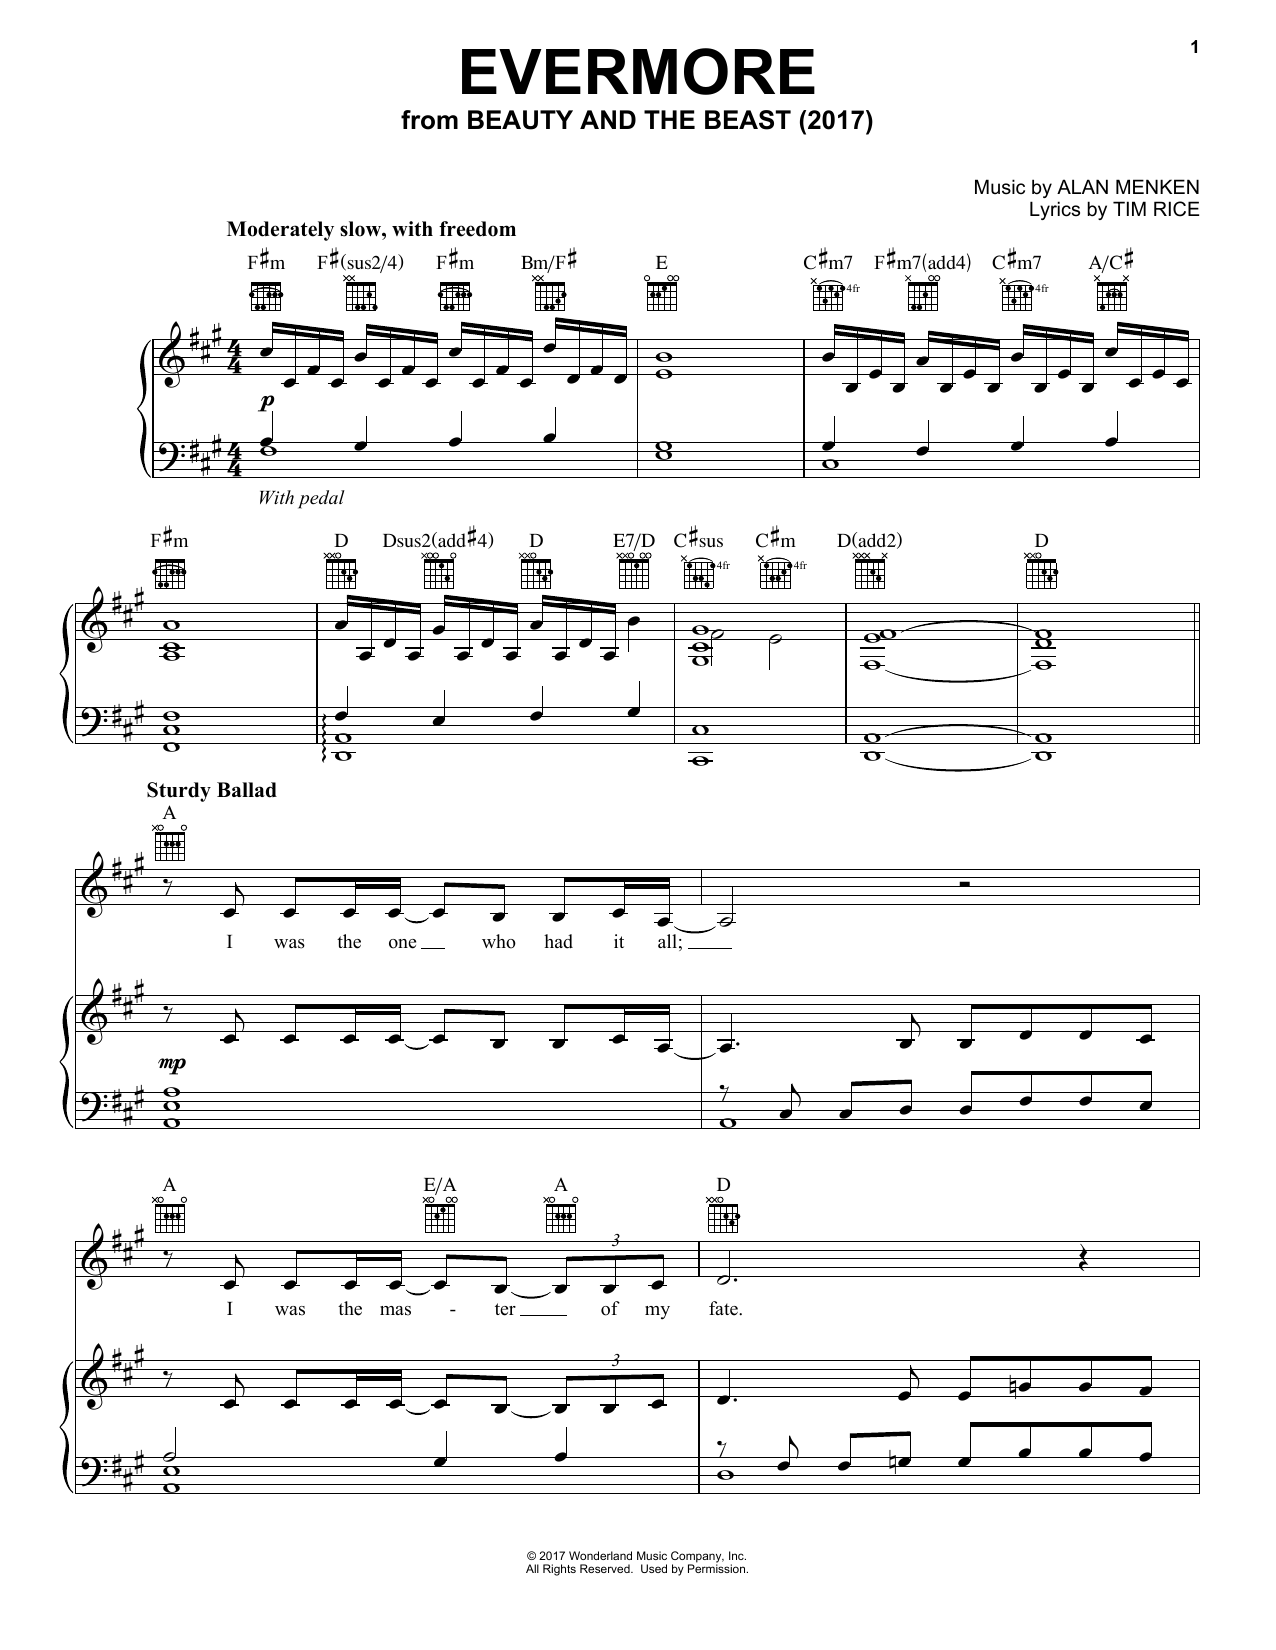 Tim Rice Evermore (from Beauty and the Beast) sheet music notes and chords. Download Printable PDF.